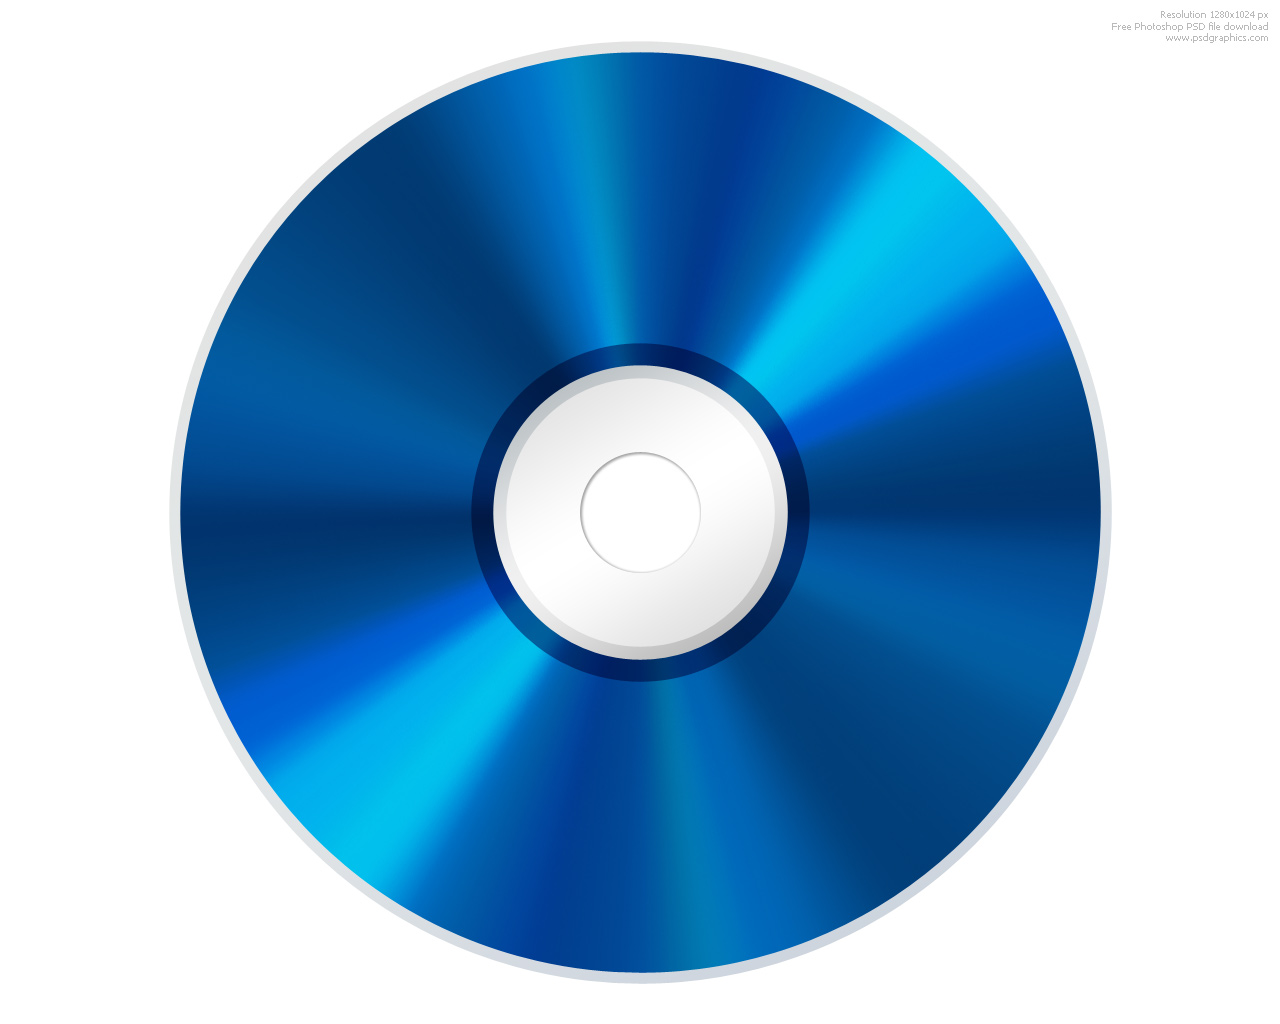 Blu ray disc logo as an app icon. Clipping path included Stock 